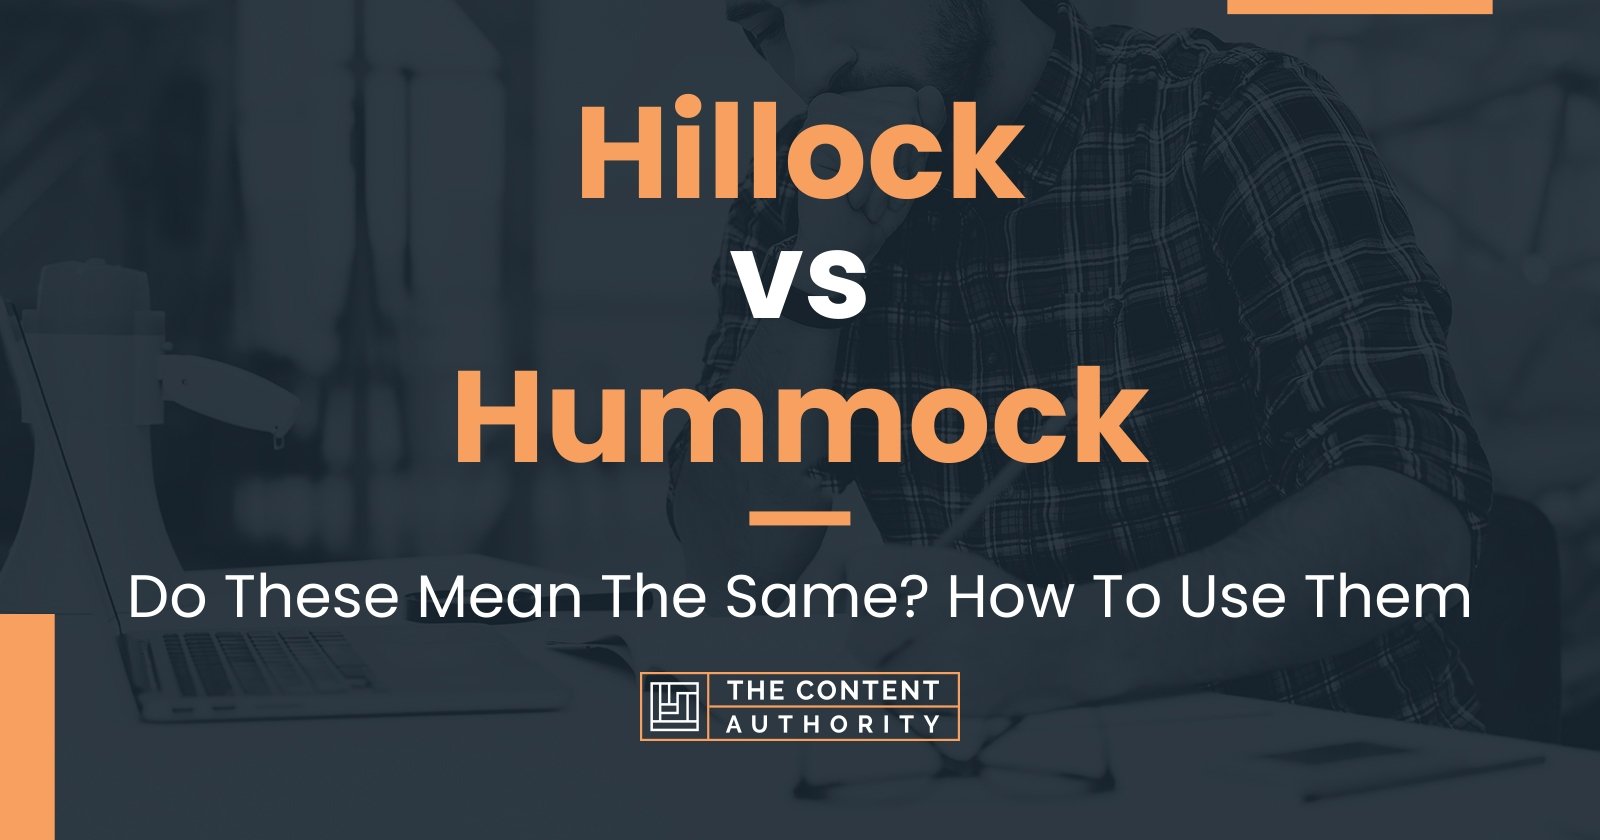 Hillock vs Hummock: Do These Mean The Same? How To Use Them